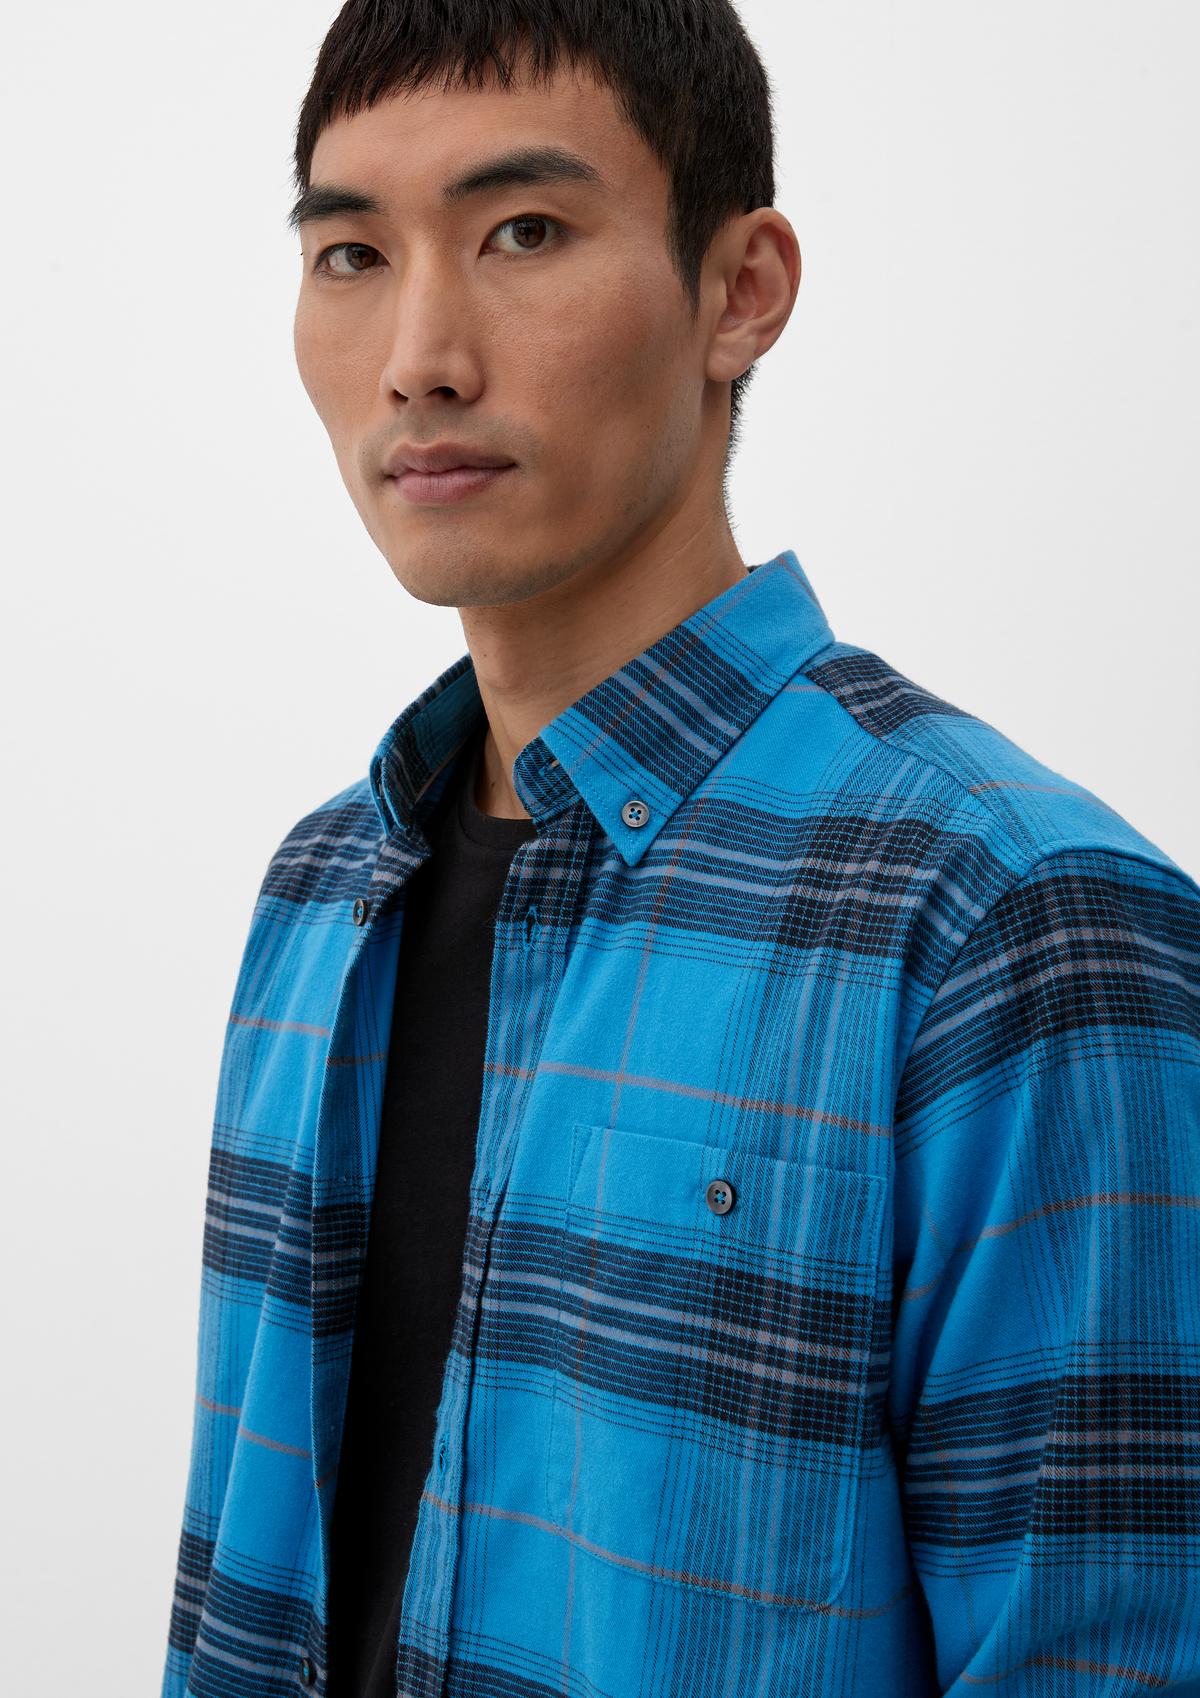 s.Oliver Regular: twill shirt with check pattern